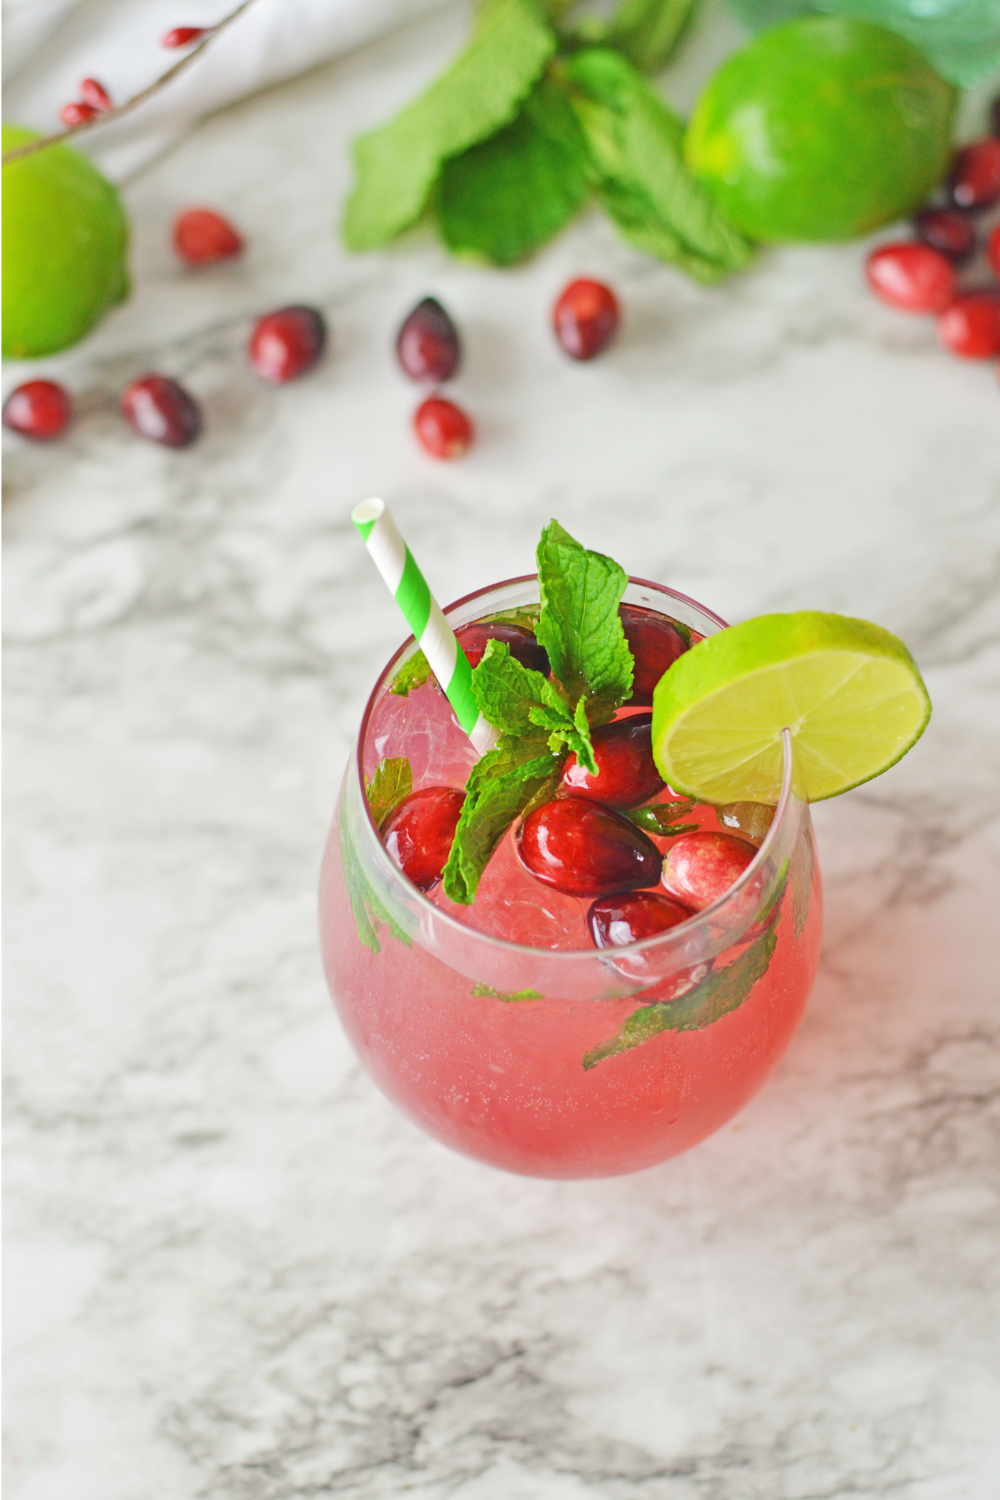 a view of a cranberry mojito from above. Cranberries and limes can be seen in the background.